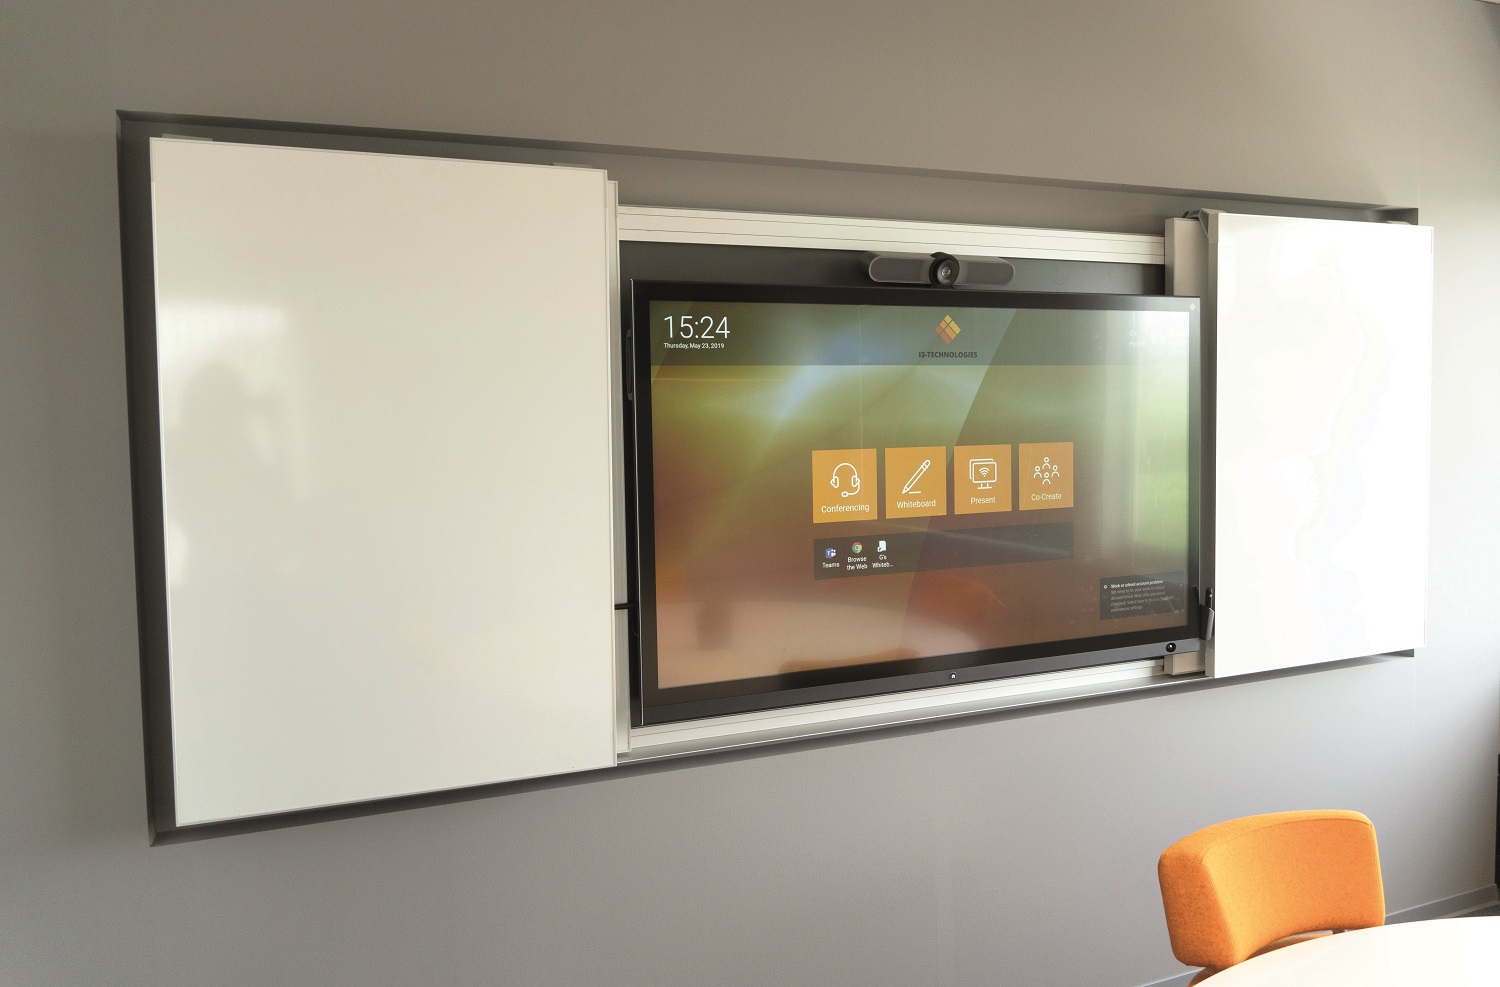 MOMENTUM combined with an i3TOUCH screen: the boards slide and reveal the screen only when necessary.